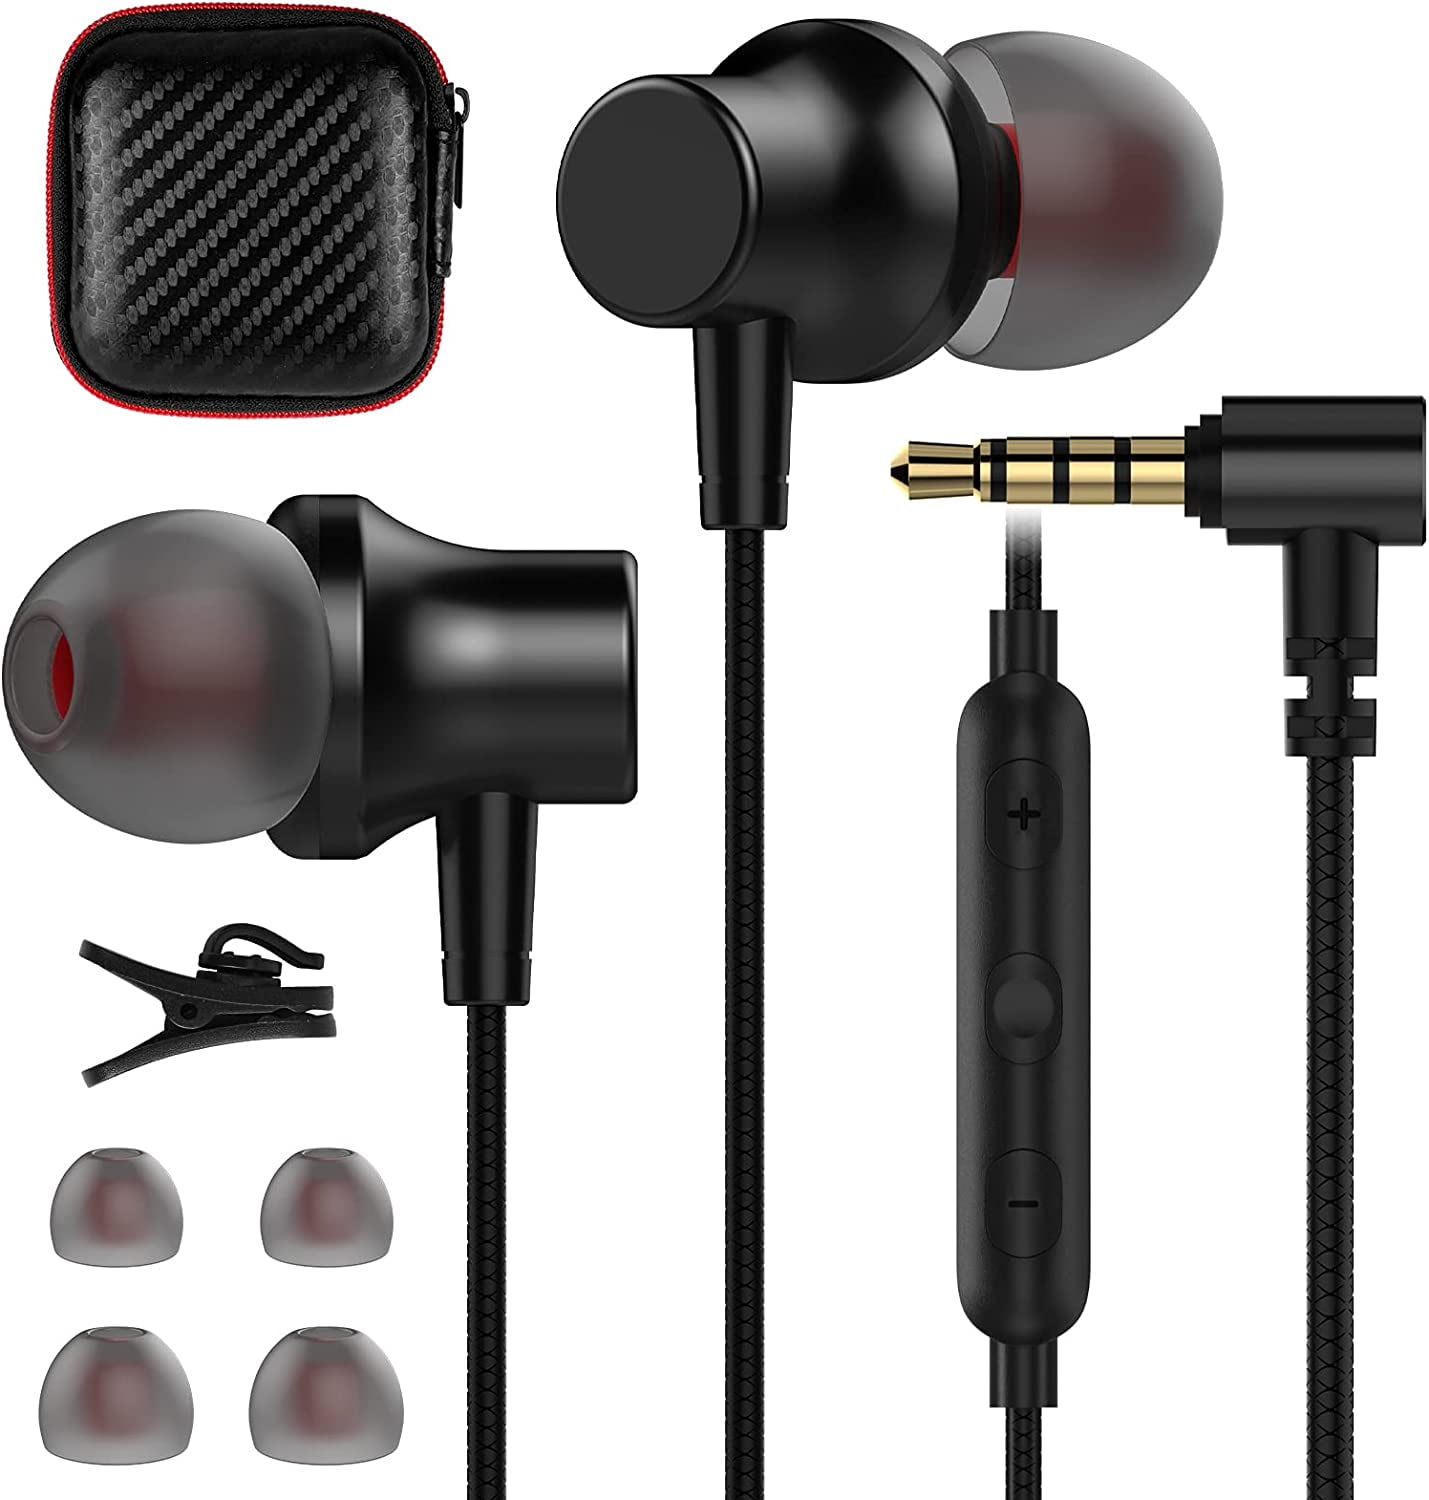 3.5mm Wired Headphones s, Magnetic Earbuds with Case Stereo 3.5mm Jack - Walmart.com